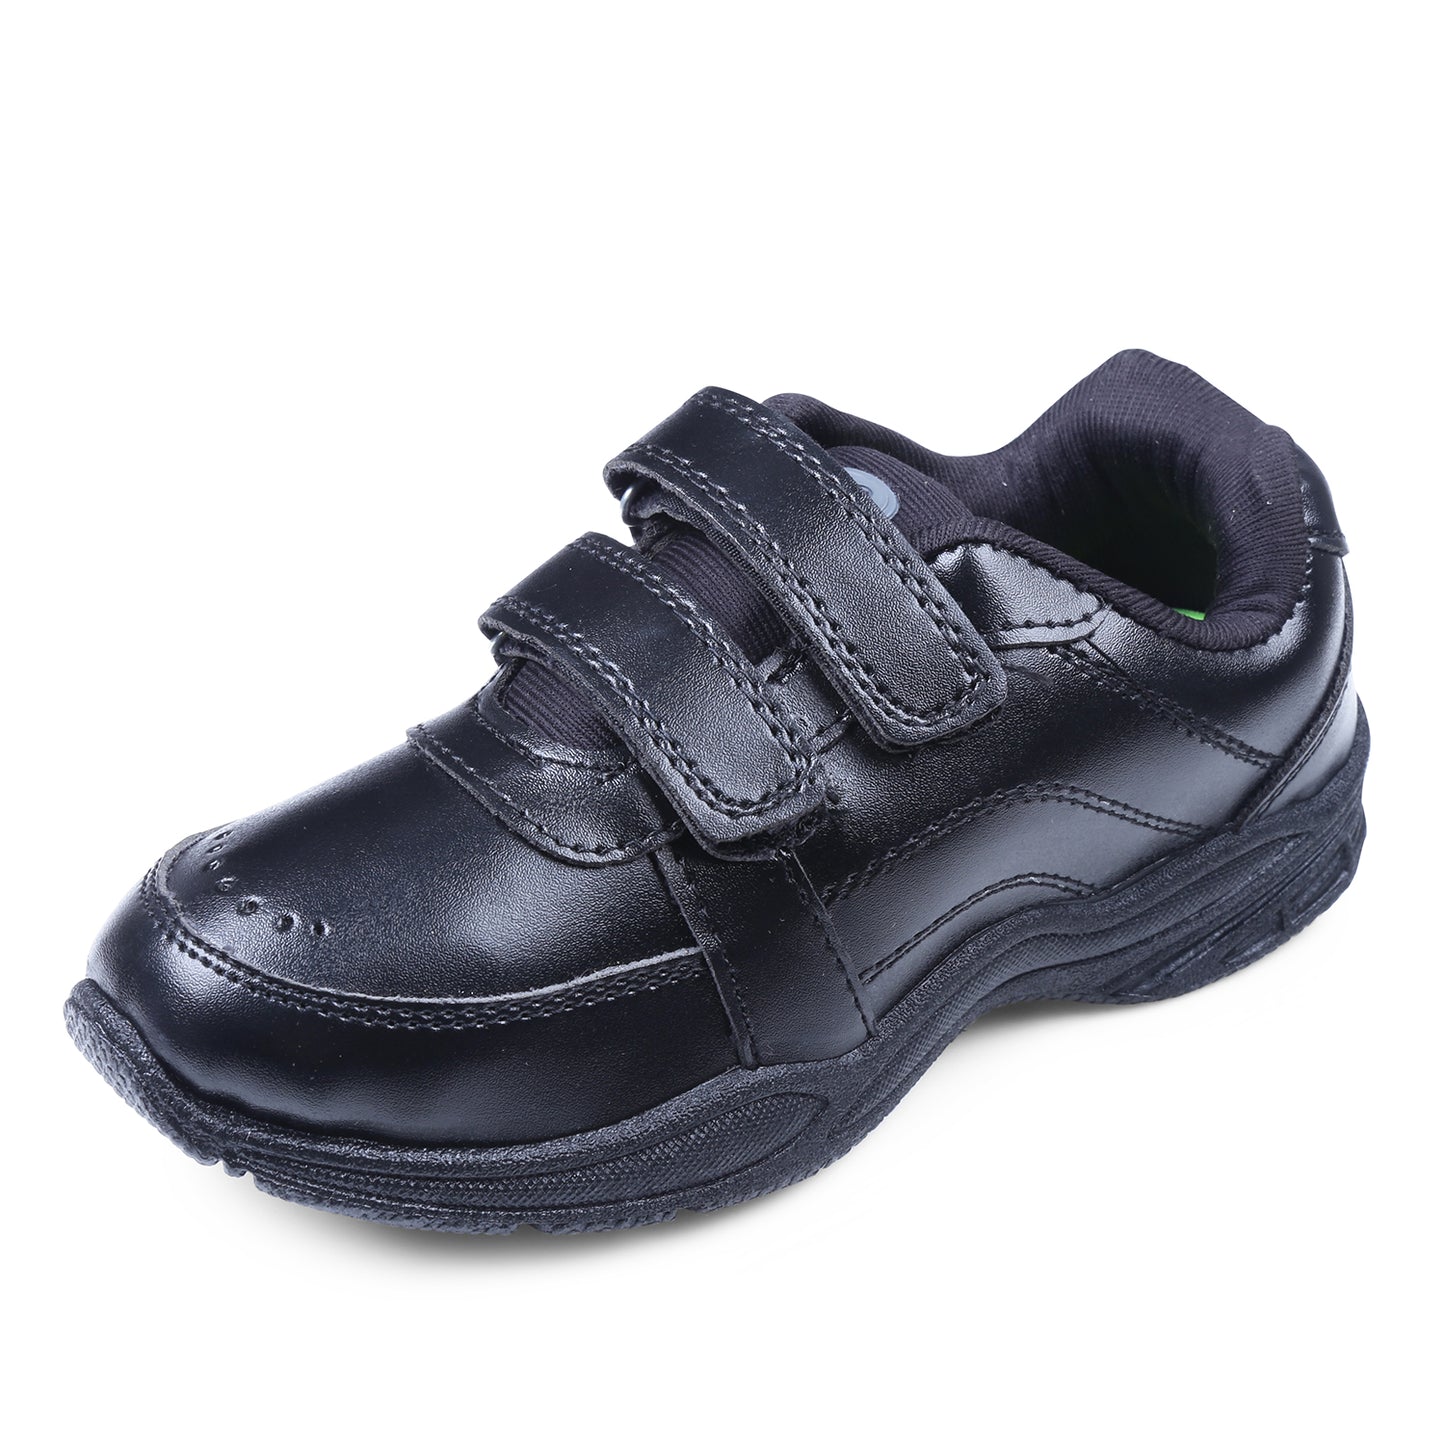 DOCTOR EXTRA SOFT Unisex-Child/Kids/Adults Black & White Gola Shoes with Memory Foam Cushion & Anti-Bacterial Technology| Ideal for School, Formal, Casual, Uniform, Running| Comfort & Durable Boys/Girls